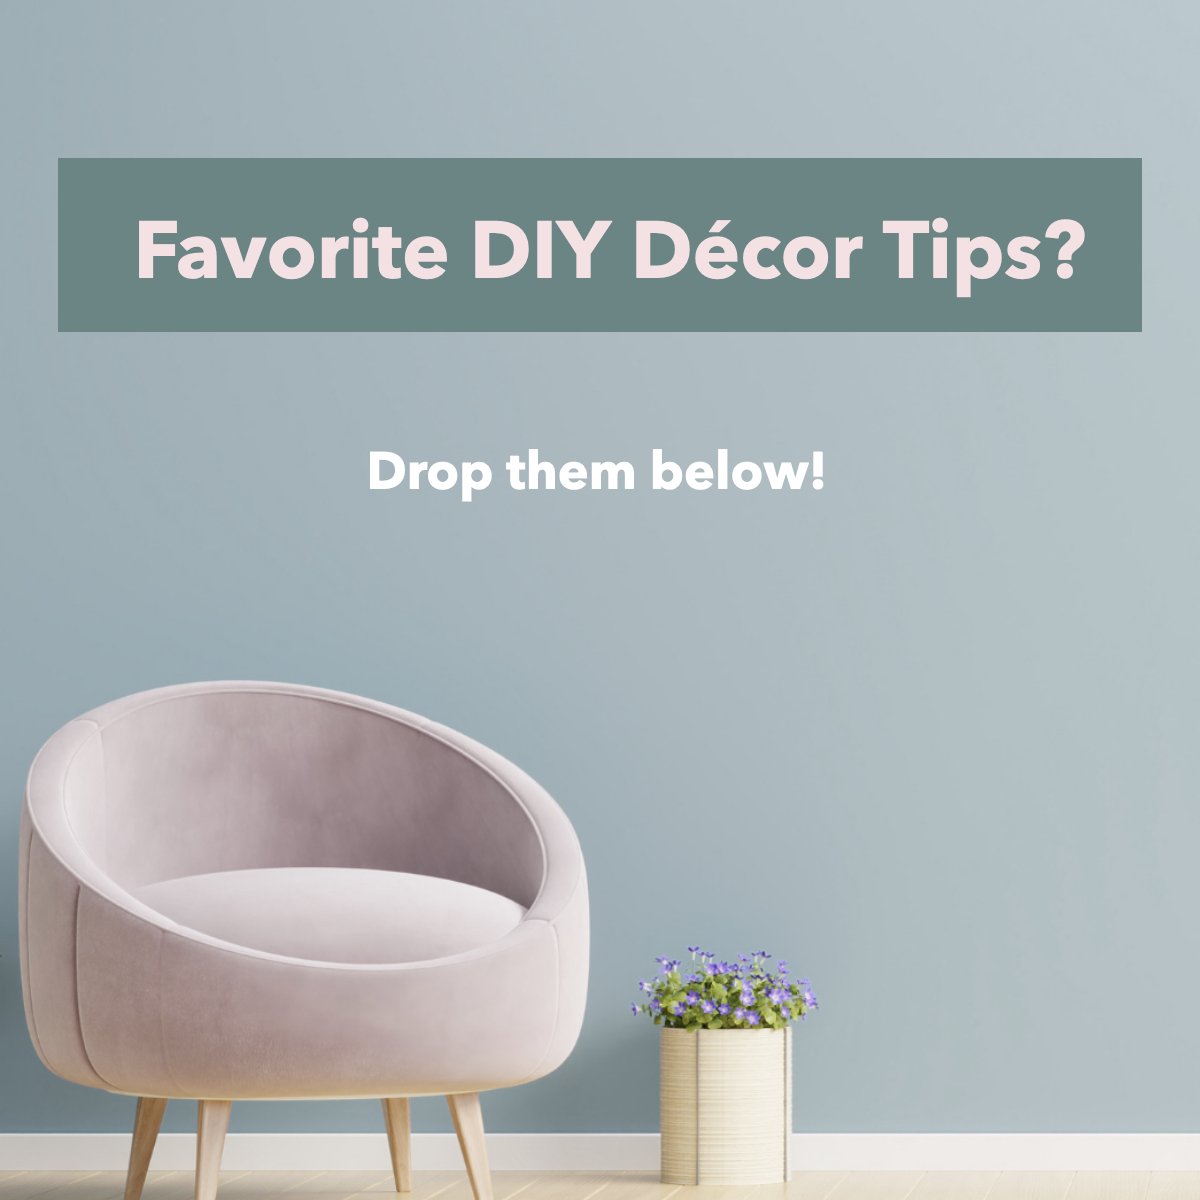 We want you to share your tips with us!!!

Drop them in the comments 💭! 

#DIY #Question #Interiordesign #designtips #DIYdecor
 #AndreaDavis